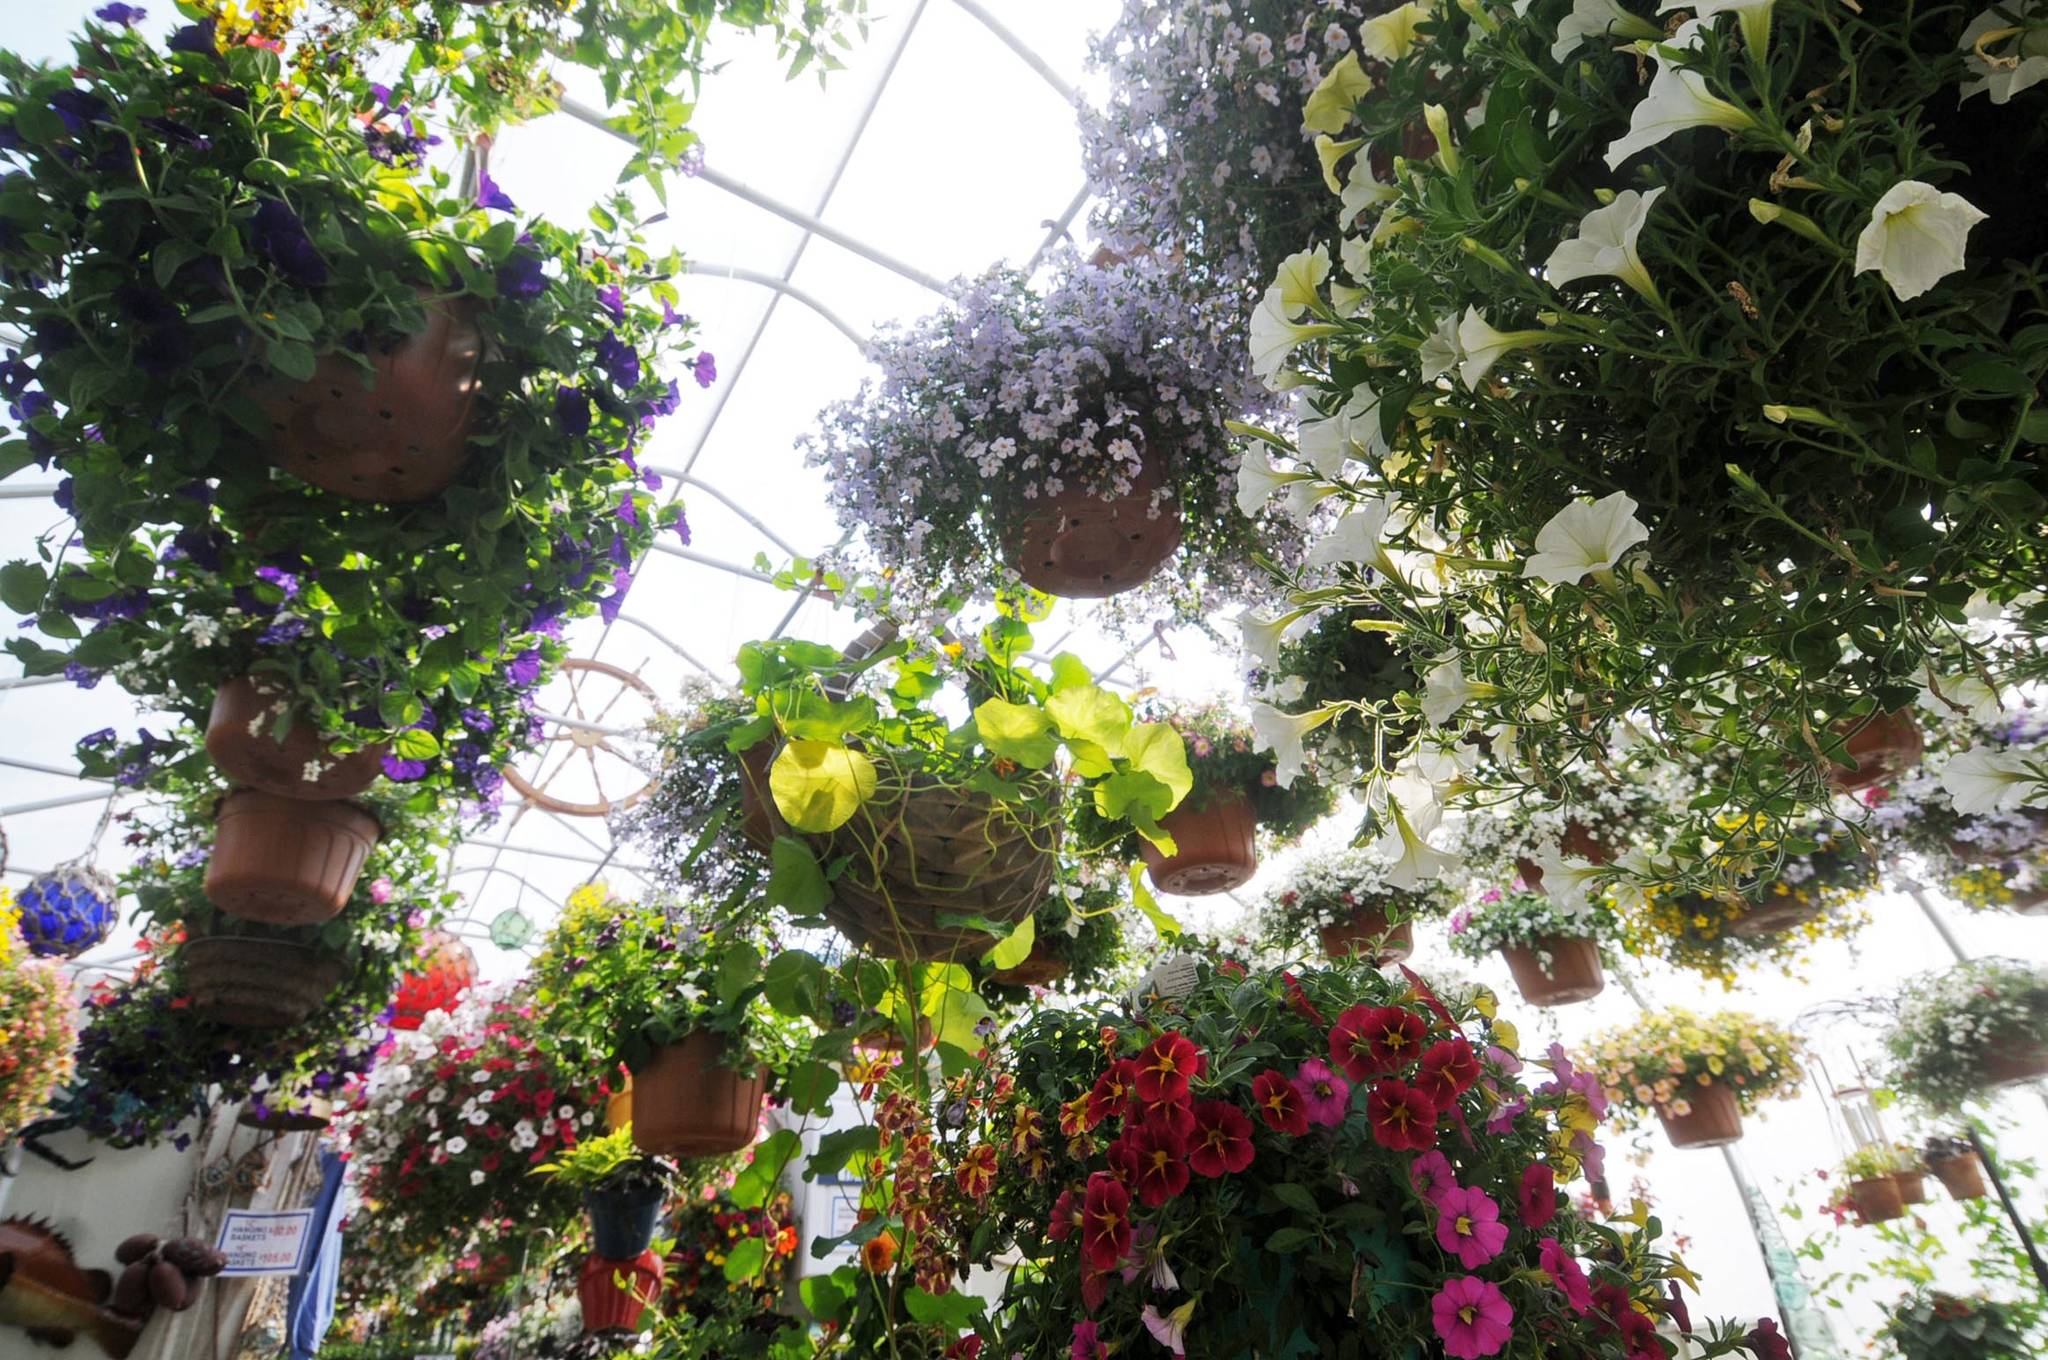 Blooming baskets hang from the ceiling of the Rusty Ravin greenhouse on Friday, June 1, 2018 near Kenai, Alaka. The Rusty Ravin’s greenhouse has been full of pre-ordered flower baskets this spring waiting to be picked up because it’s been too chilly for customers to put them outside yet without risking their flowers dying. Now that the chill is fading from the air on the Kenai Peninsula, gardeners are getting into growing season. (Photo by Elizabeth Earl/Peninsula Clarion)